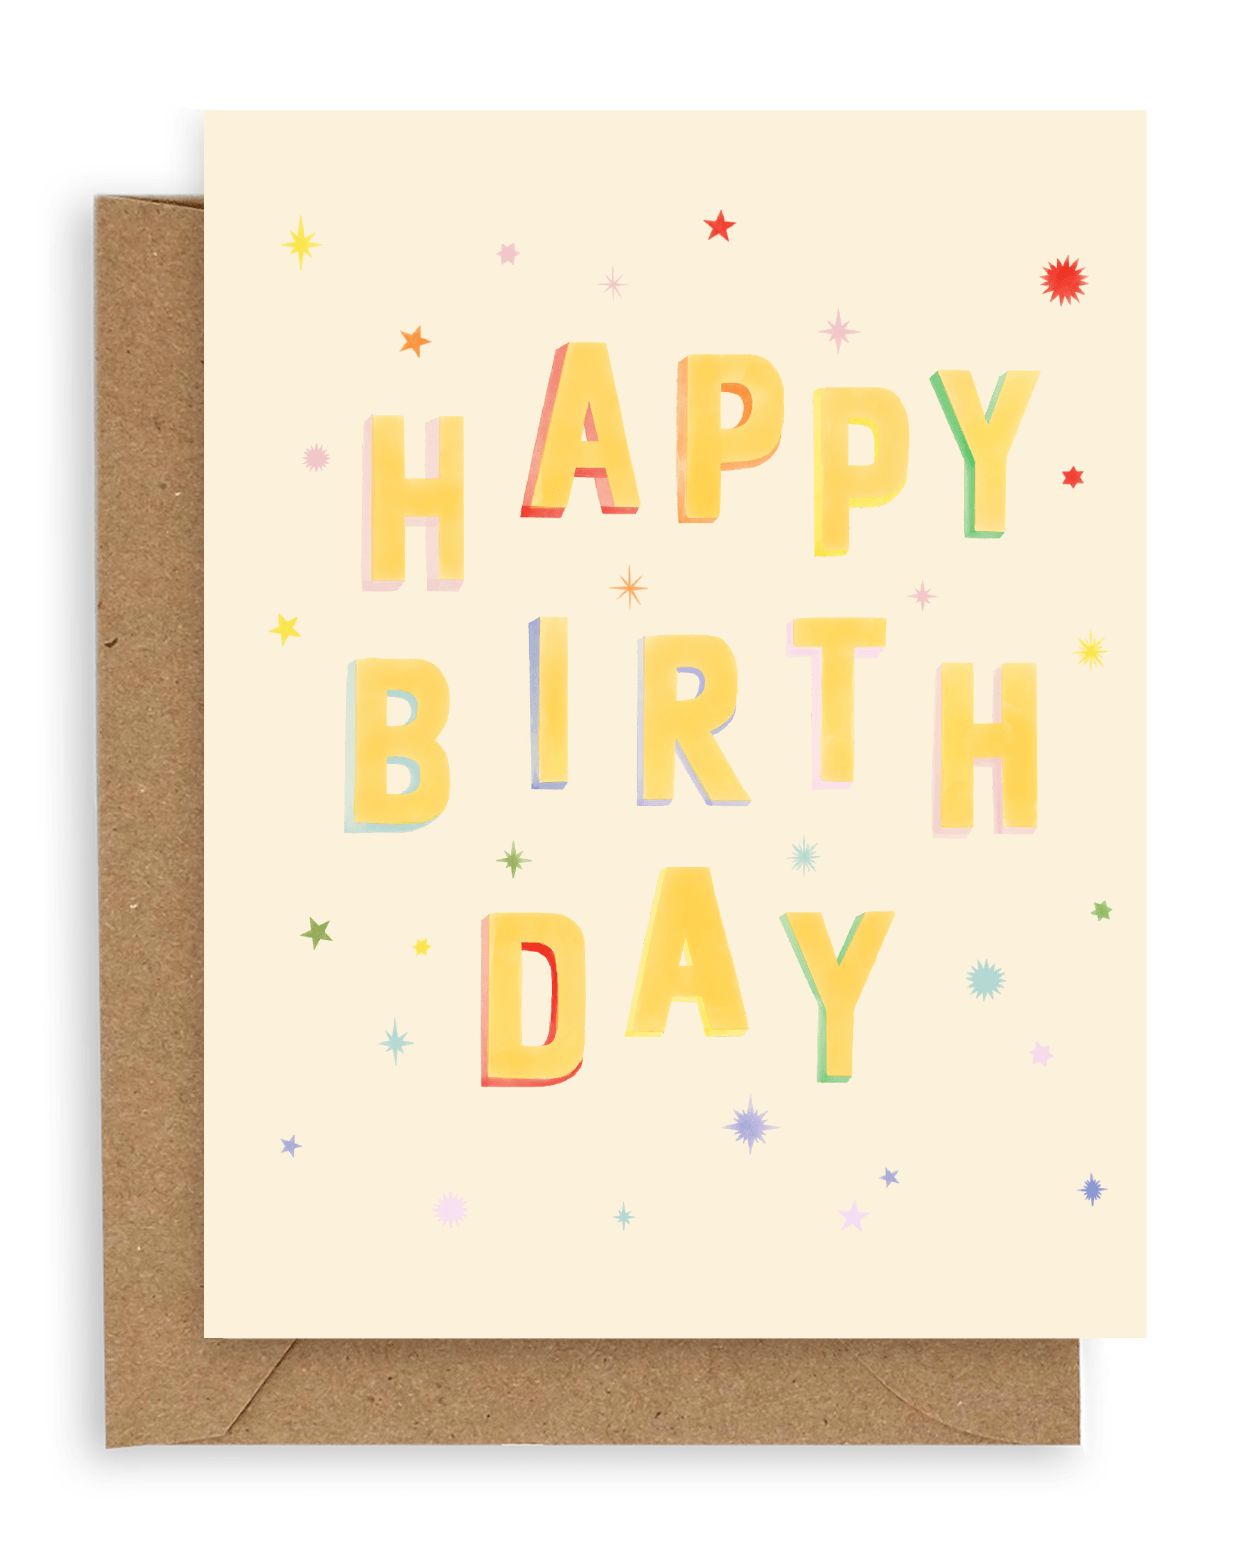 Rainbow colored stars surround the words &quot;happy birthday&quot; in yellow font, printed on a cream background. Shown with kraft envelope.